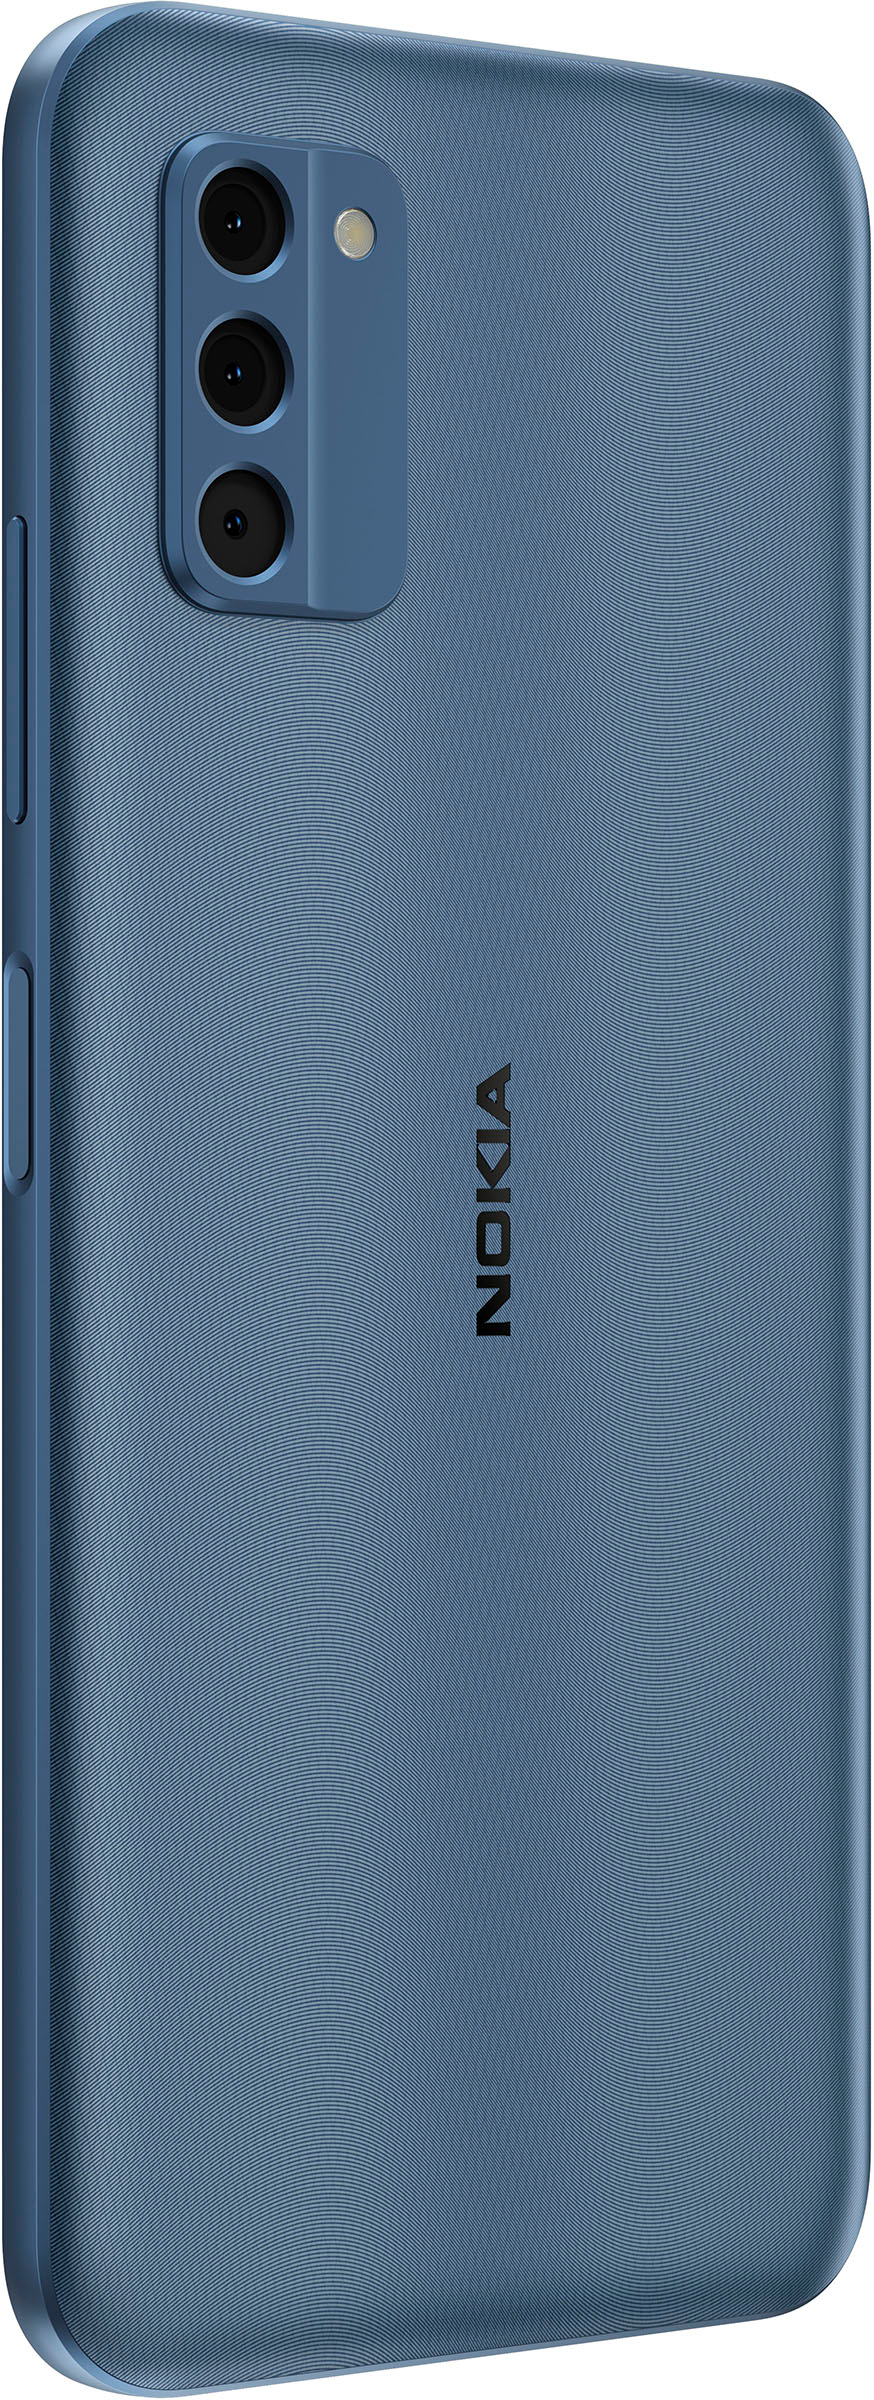 Best Nokia Phones With a Good Camera: Prices and Key Specifications